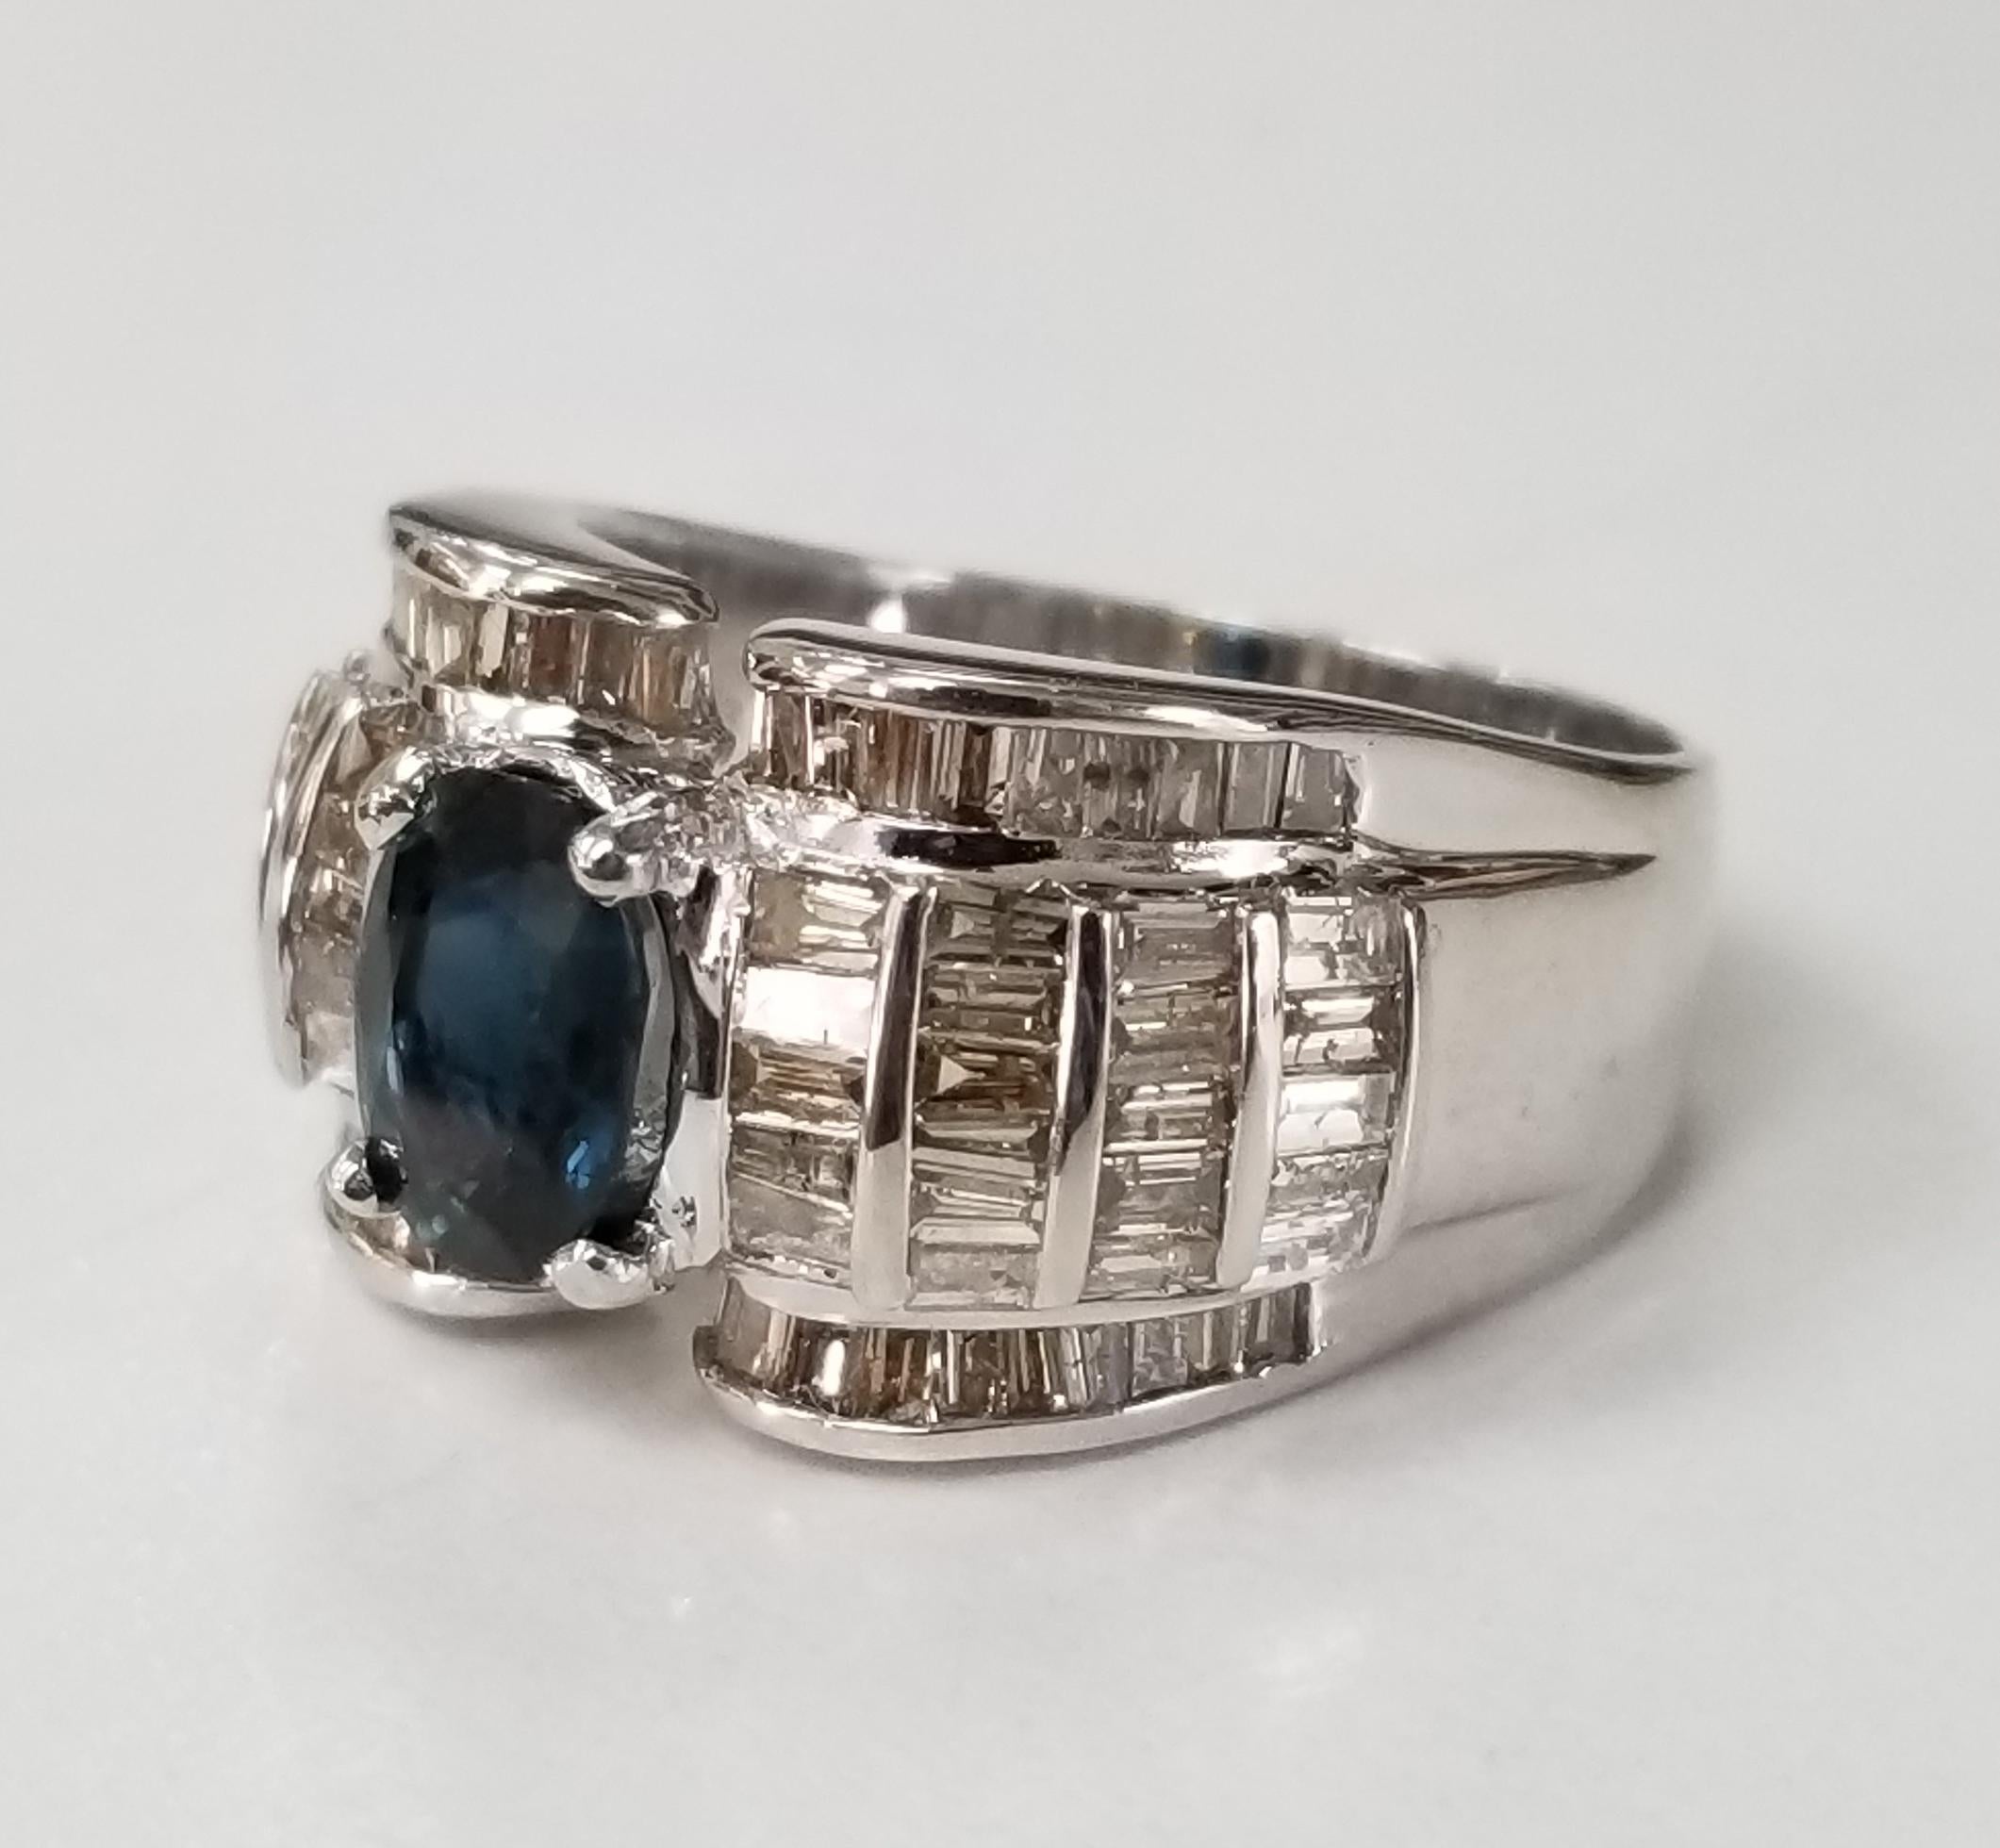 18k white gold sapphire and diamond baguette ring, containing 1 oval cut sapphire weighing1.25cts. and 86 baguette cut diamonds weighing 1.55cts.  This ring is a size 6.5 but we will size to fit for free.